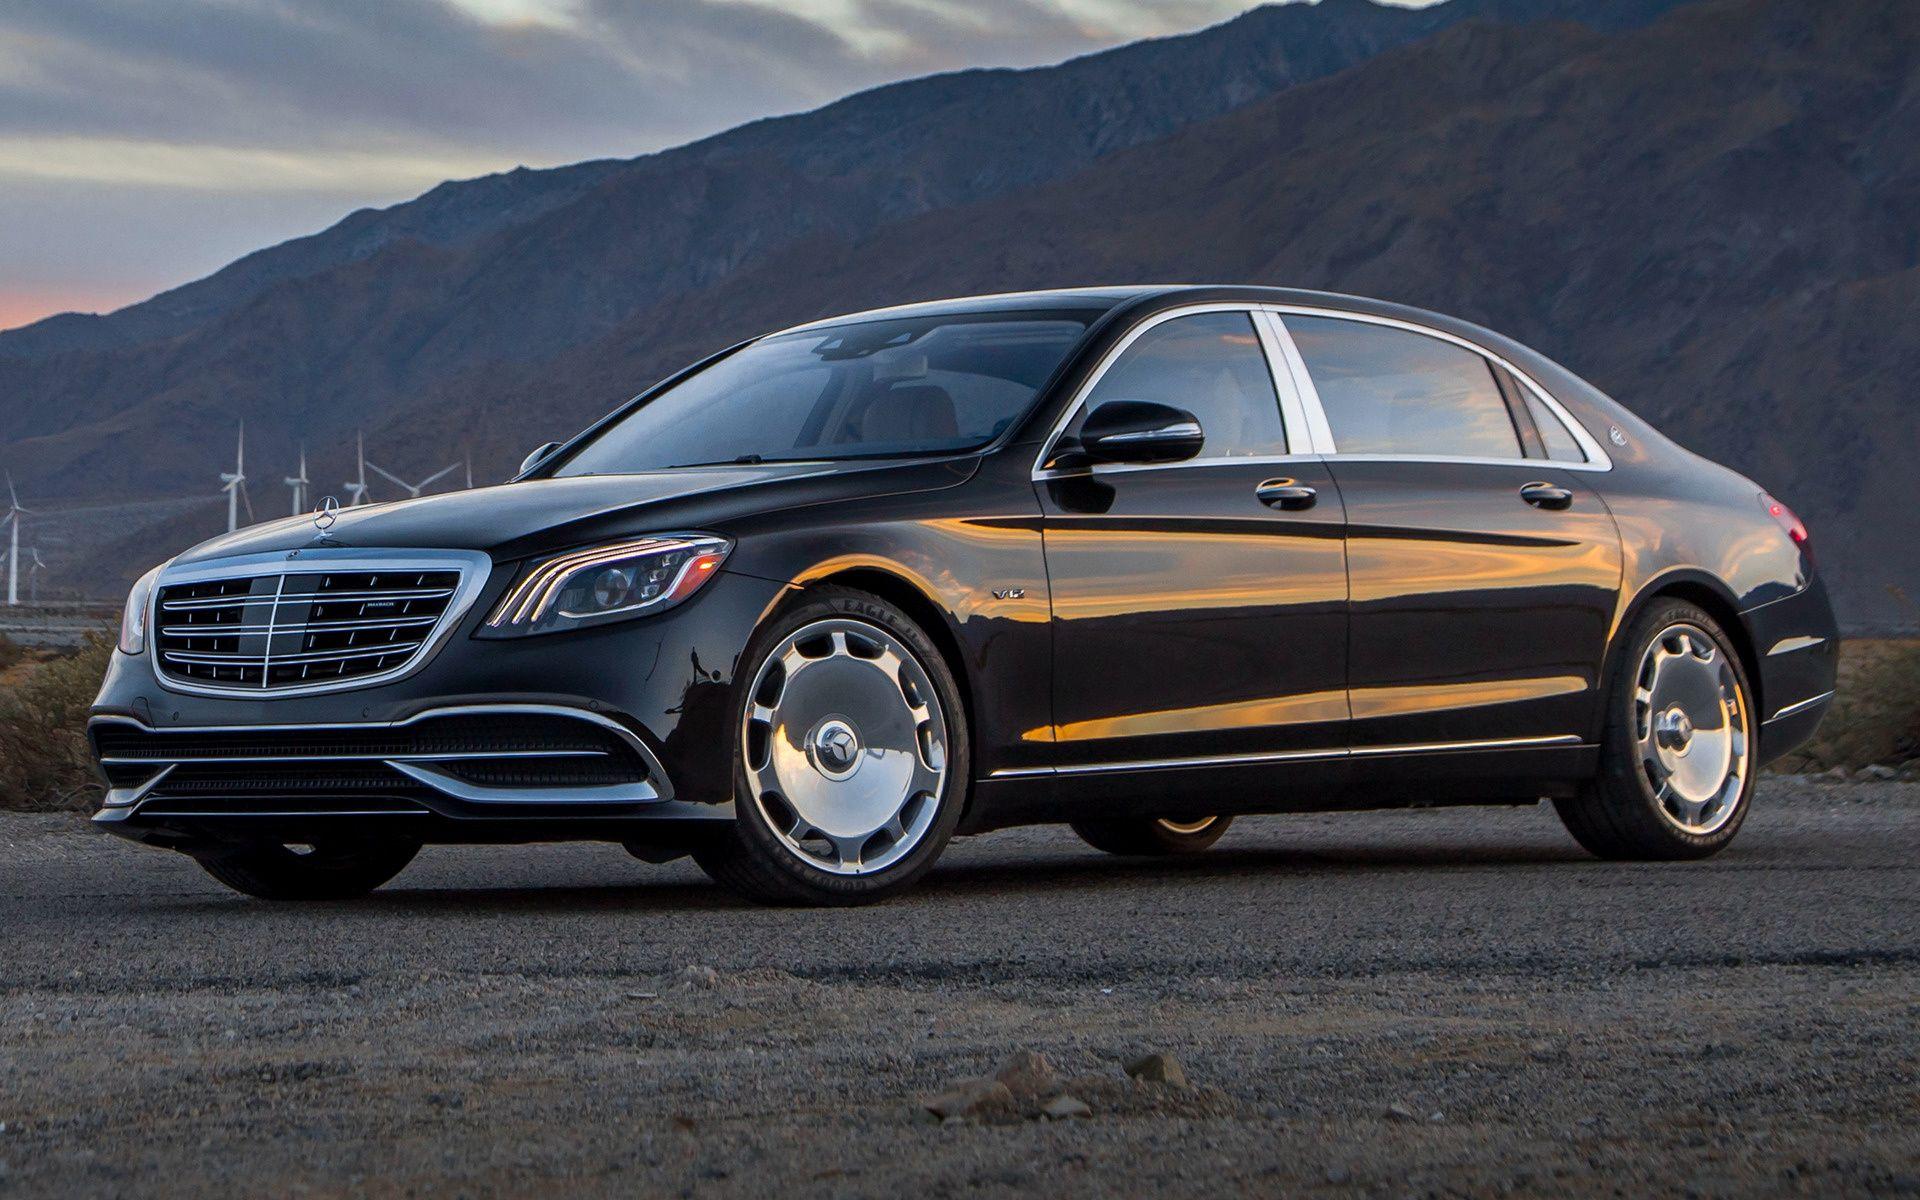 Mercedes Maybach S Class (US) And HD Image